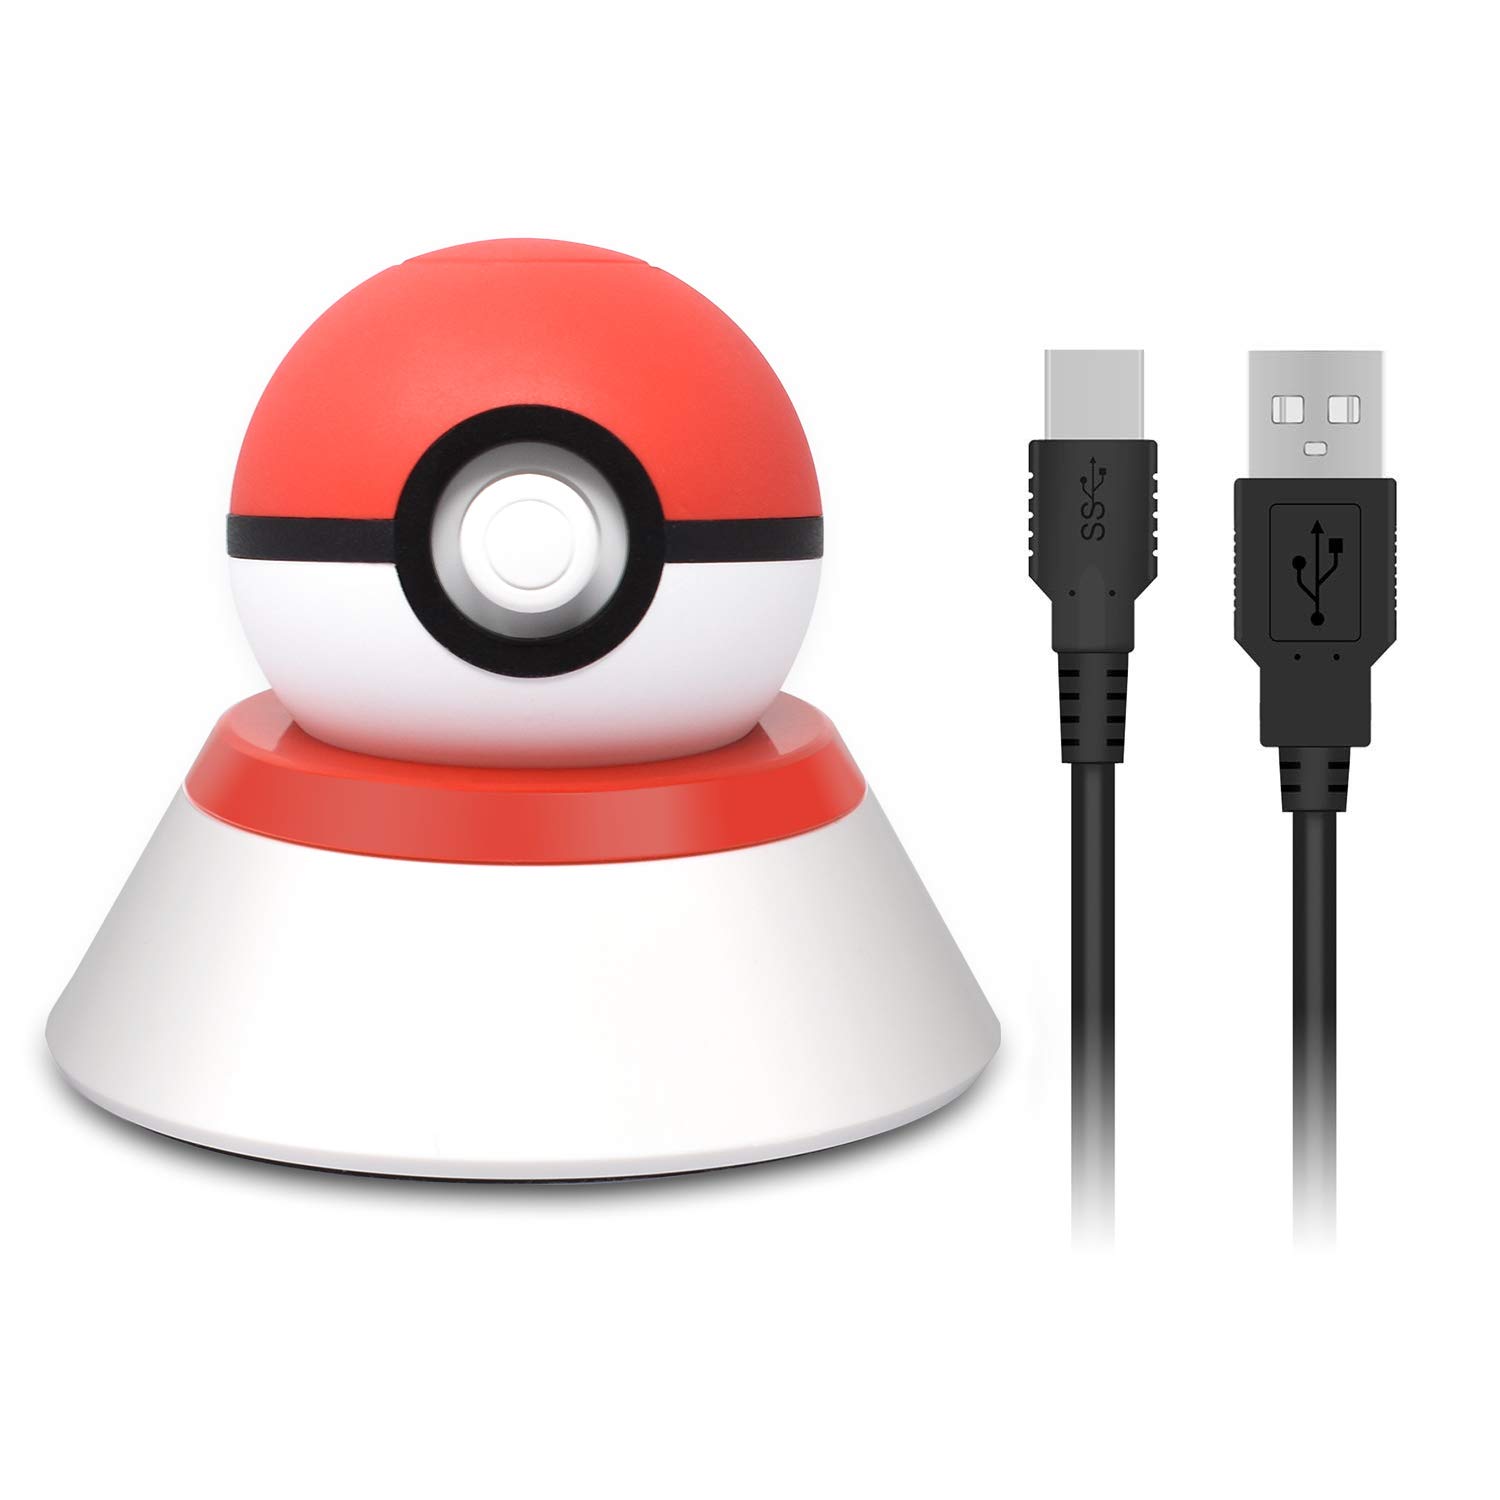 Book Cover Stand and Charger for Nintendo Switch Pokeball Plus, Charging Cord and Bracket Mount for Lets Go Pikachu Lets Go Eevee Pokeball Plus Controller with a USB Type C Charging Cable - 2.8ft